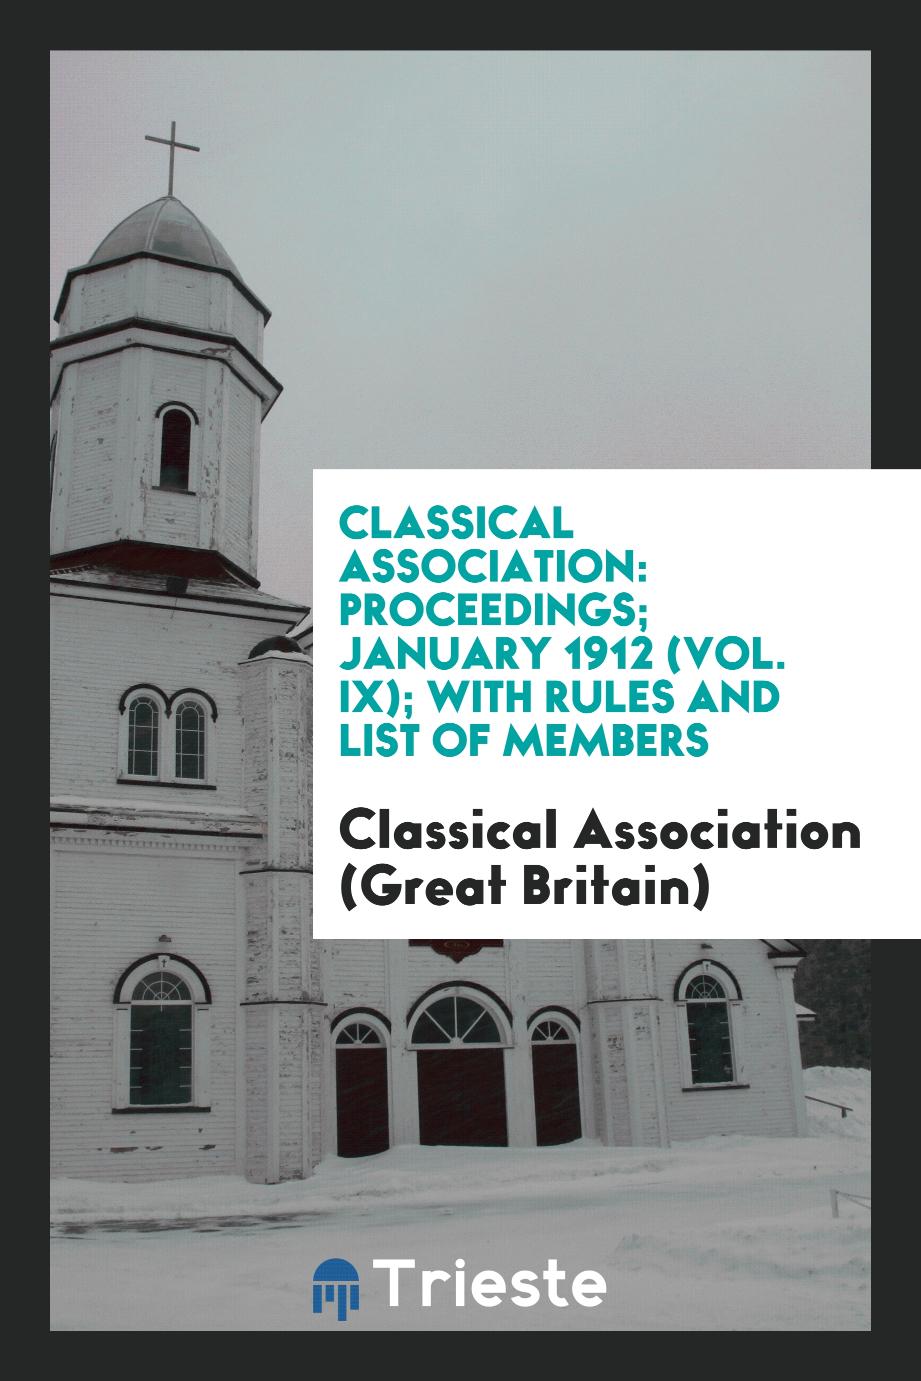 Classical Association: Proceedings; January 1912 (Vol. IX); with rules and list of members